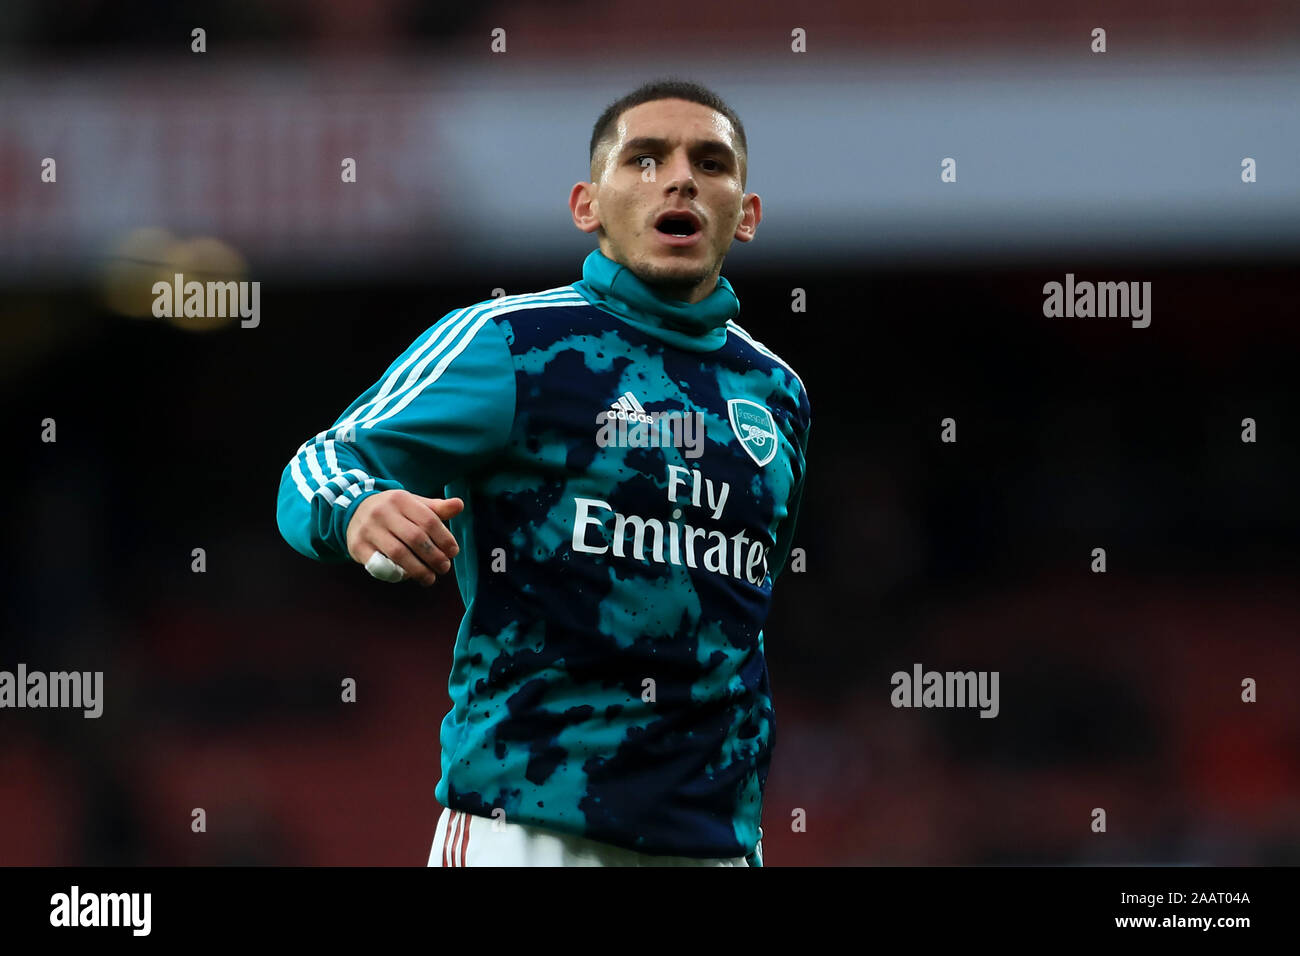 London, UK. 23 November 2019. Lucas Torreira of Arsenal during the Premier League match between Arsenal and Southampton at the Emirates Stadium, London on Saturday 23rd November 2019. (Credit: Leila Coker | MI News) Photograph may only be used for newspaper and/or magazine editorial purposes, license required for commercial use Credit: MI News & Sport /Alamy Live News Stock Photo